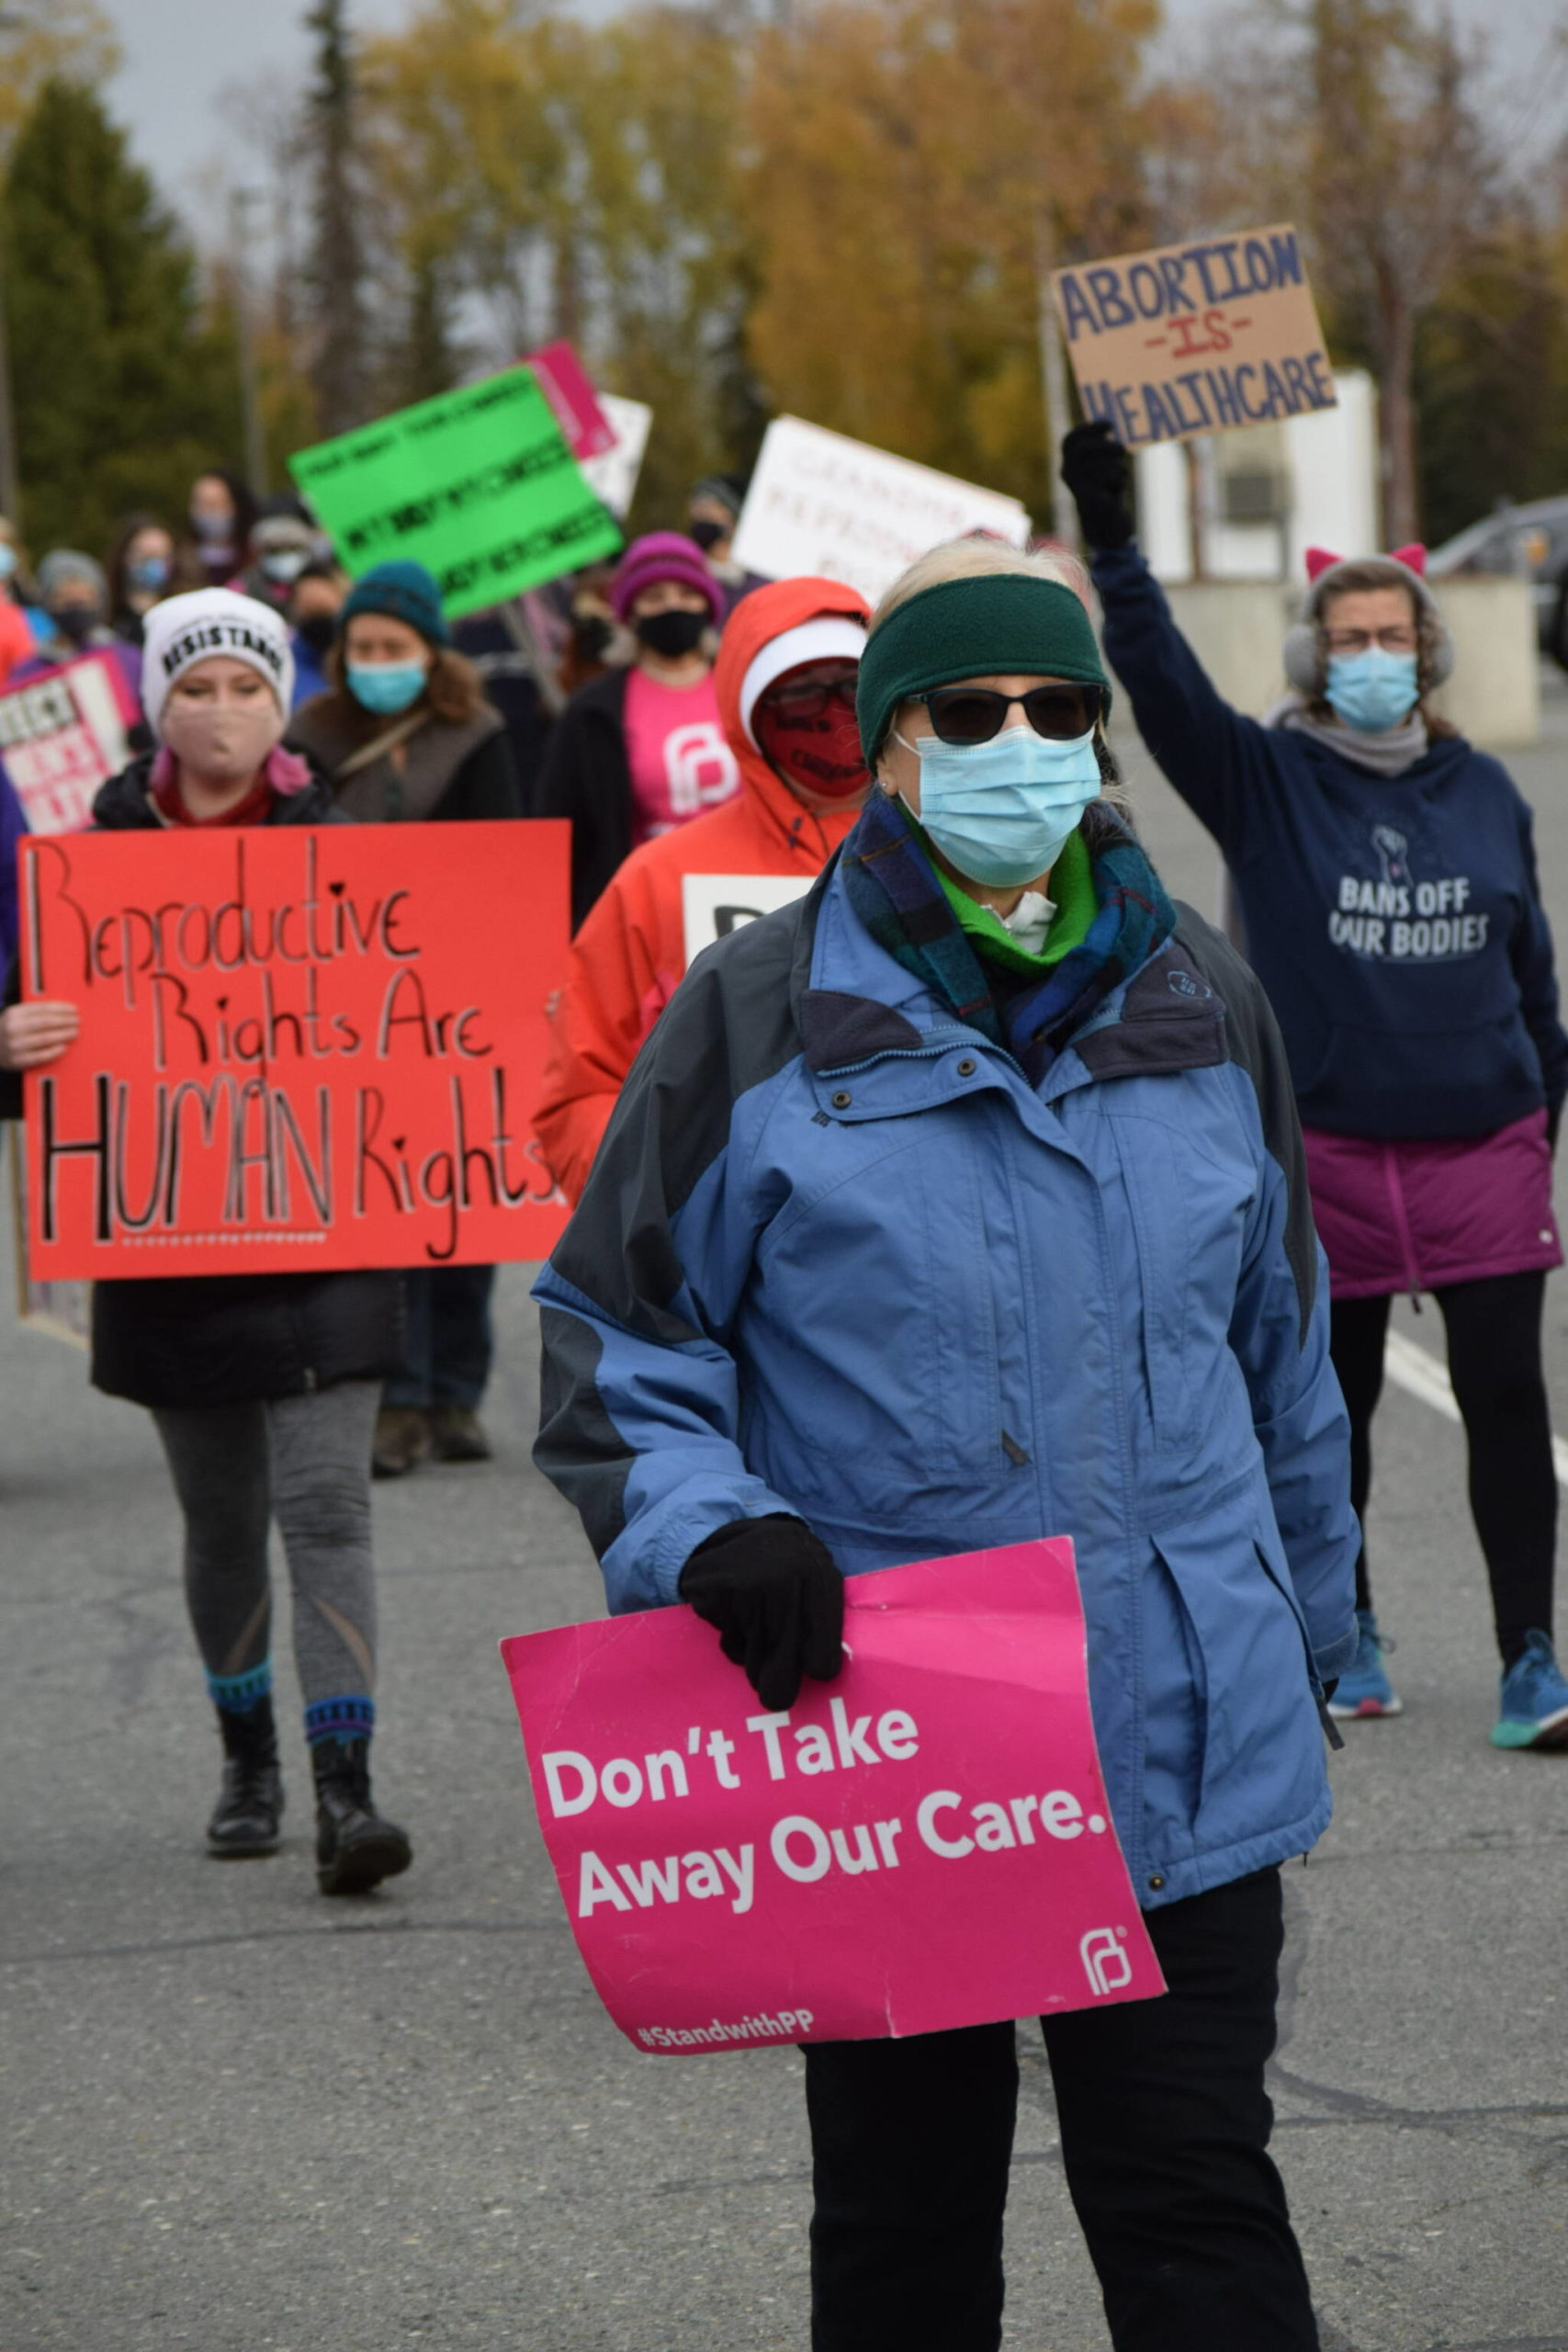 Demonstrators march through Soldotna as part of the national Women’s March “Rally for Abortion Justice” on Saturday, Oct. 2, 2021. (Camille Botello/Peninsula Clarion)